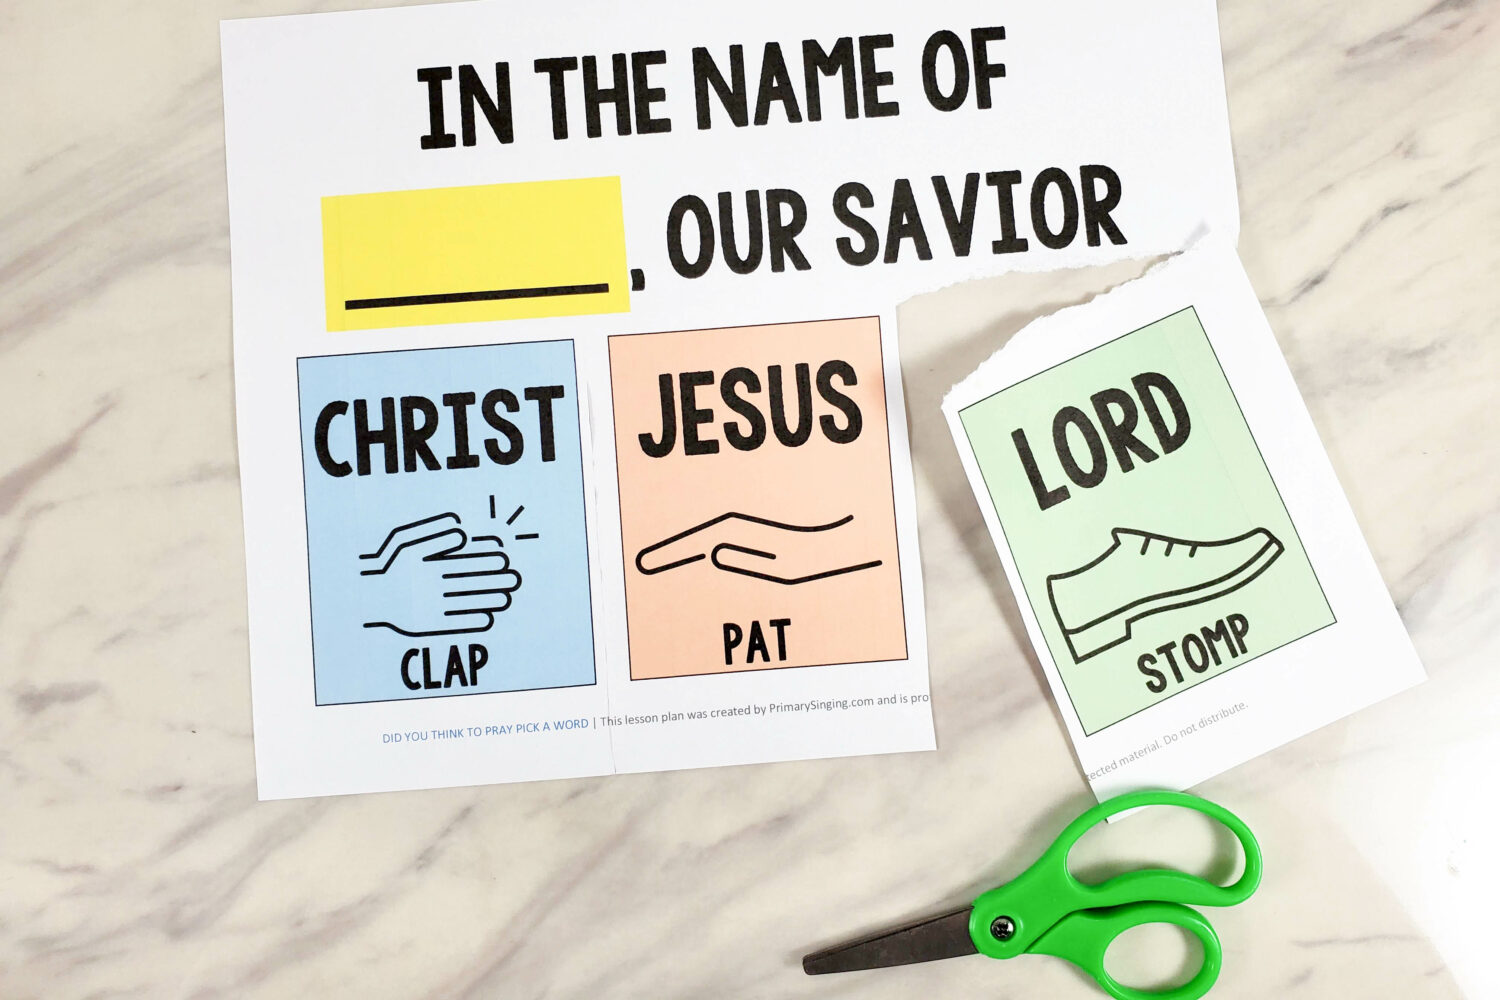 Did You Think to Pray Pick a Word singing time idea lesson plan and printable helps for LDS Primary Music Leaders teaching helps!